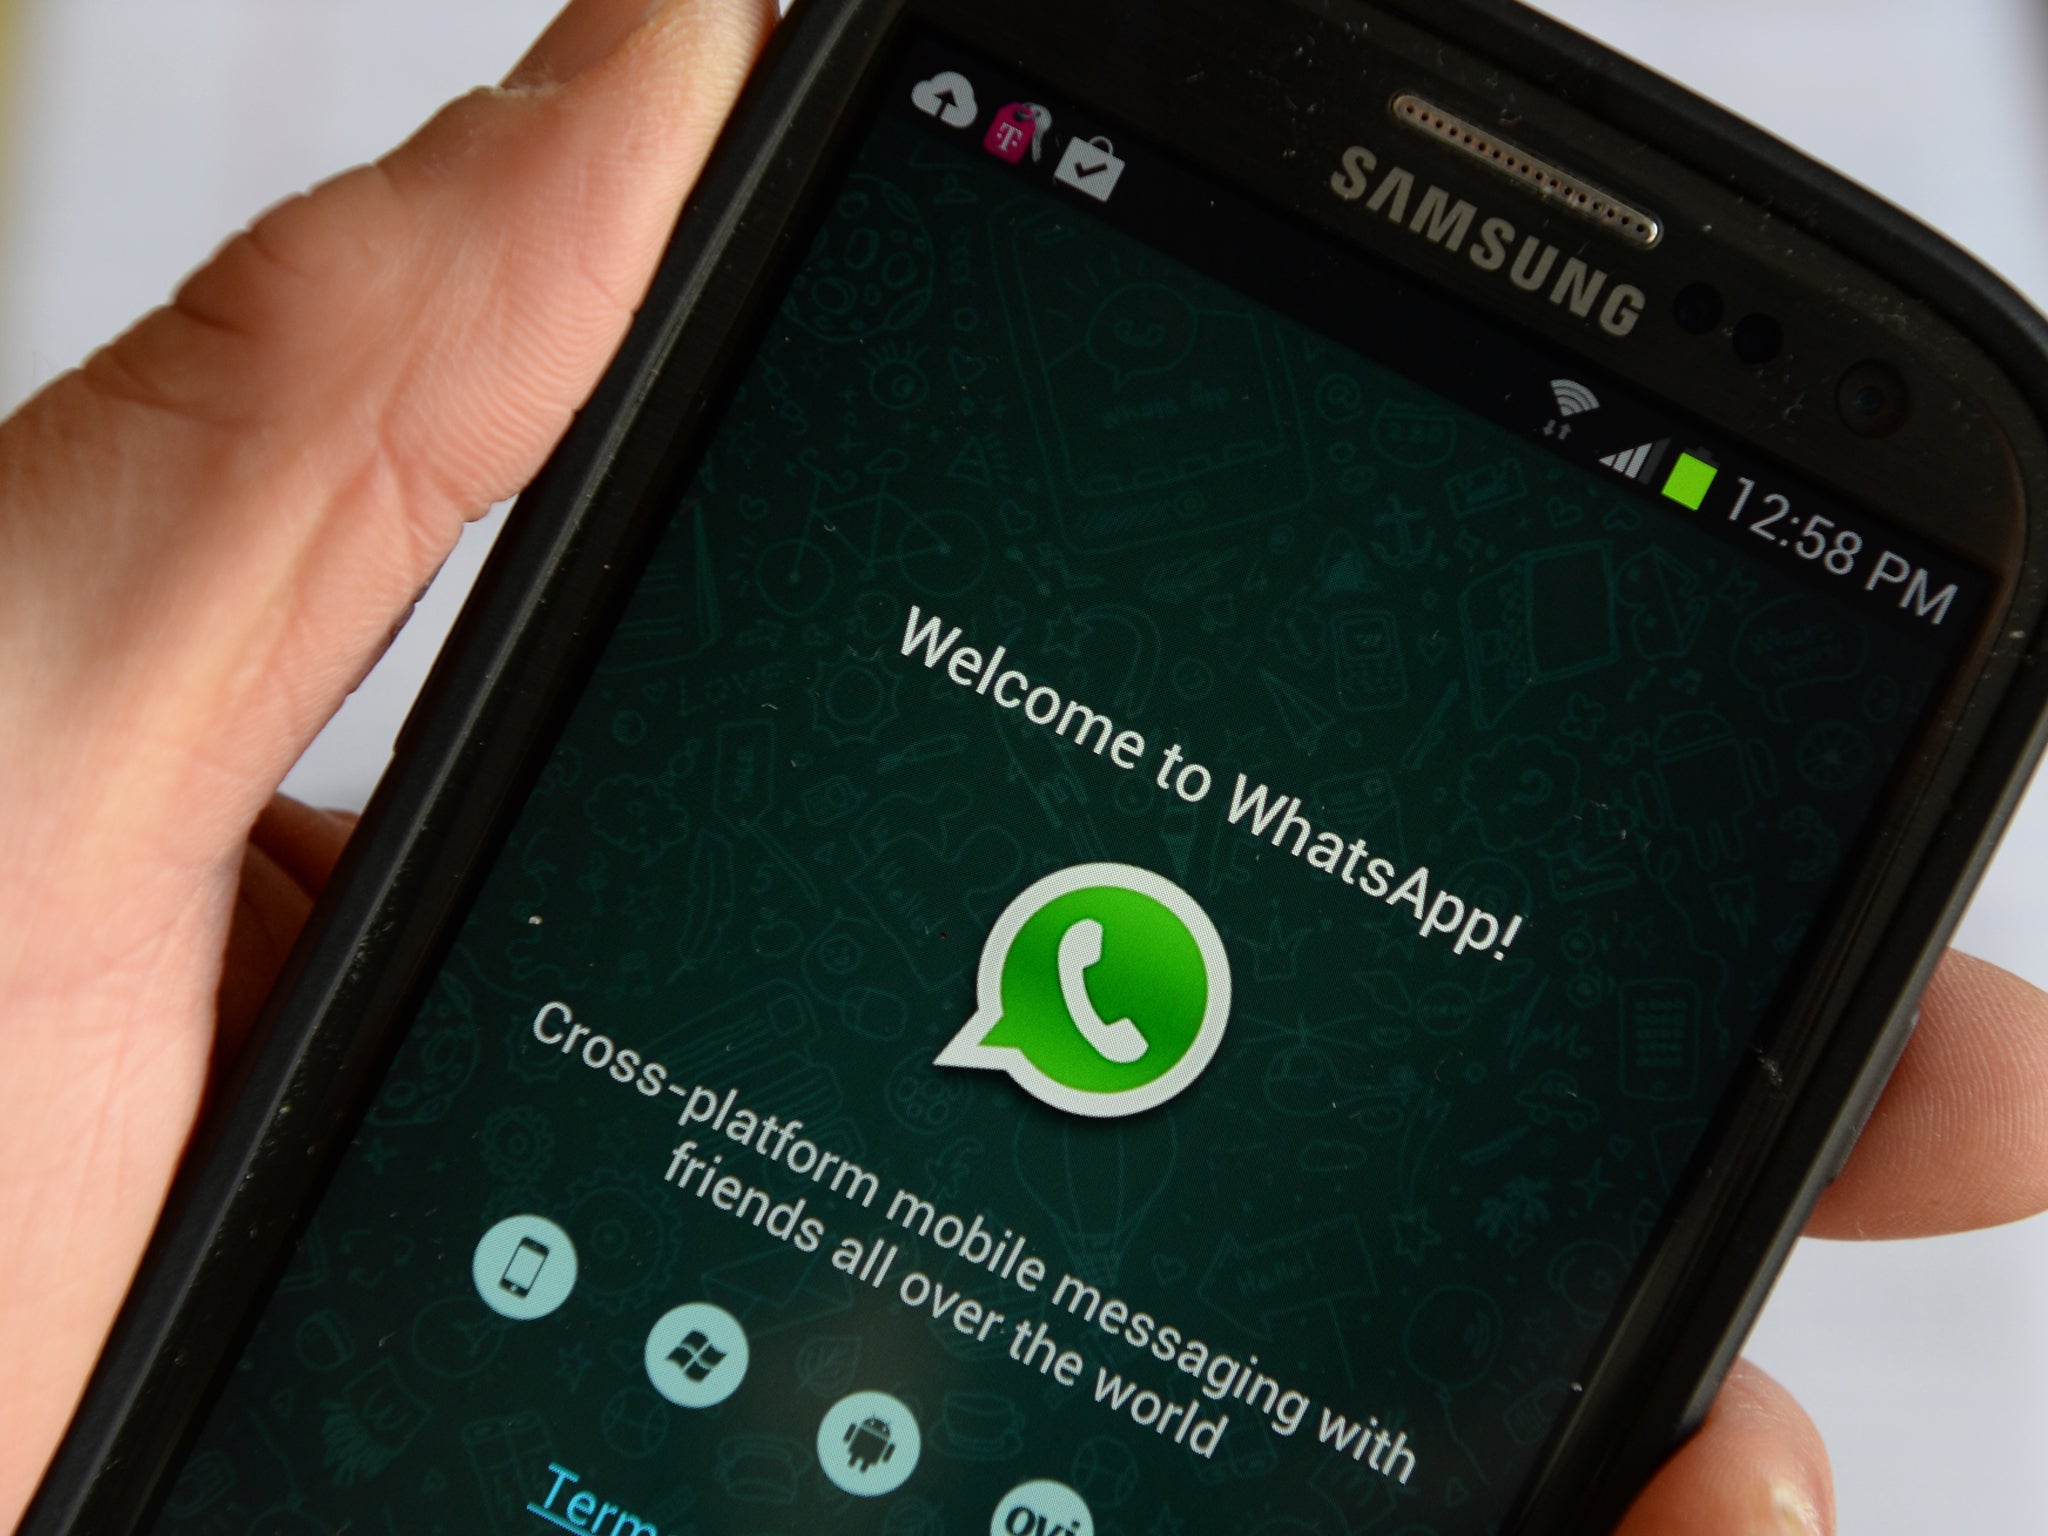 Image result for Whatsapp has come out with even more features to its ever changing platform. The last major update that the company had come out with was Whatsapp Stories while this time it has brought about changes to its status update. If you have a status to update, that is not an image or a photo, all you need to do is add colour to the text and put it against an eye catching background. What sets this aside from the similar feature on Facebook and makes it more like Instagram is the fact that you can add links to the status as well. For instance, you can link the address of a venue in your Whatsapp status so that your friends know where you are. This feature is similar to the one that is found on Snapchat. This update to WhatsApp is available on both Android as well as iOS devices. If your phone does not auto update, all you need to do is go to the respective Stores and update the feature. Reports are saying that WhatsApp is going to add a button of a floating pencil above the icon of the camera. To use the feature of colored text, all the user needs to do is click on the floating pencil, write something with the help of it and upload it. There are also rumours that three other features are going to be added as well. These features will be adding emojis, selecting fonts and changing the colour of the background. After this, all the user needs to do is click on the green arrow icon that is present towards the bottom right hand corner to post the status. This update does allow the user to do other things as well such as make the text of the status bold, italicized or strike through it. This can be done by simply tapping and holding the text. Before this update was introduced, the user had to use prefix and suffix symbols to apply the effect. The latest update also allows users to view the Status updates through WhatsApp web. Other than that, with the new WhatsApp update, both Android and iOS users can now view Status updates on WhatsApp for the web as well. Rumours about the next update of WhatsApp are very interesting as it says that the device might start supporting UPI payments. These payments would be for money transfer from peer to peer. This new update has been spotted on the WhatsApp version 2.17.295 which has been seen on the Google Play Beta Program. Facebook Messenger had come out with a similar integrated payments method back in 2015. In India, Hike messenger has done the same as well in the month of June. Let us see if WhatsApp does manage to come out with a method of integrating payments and if the users will take to the new features that have been introduced.